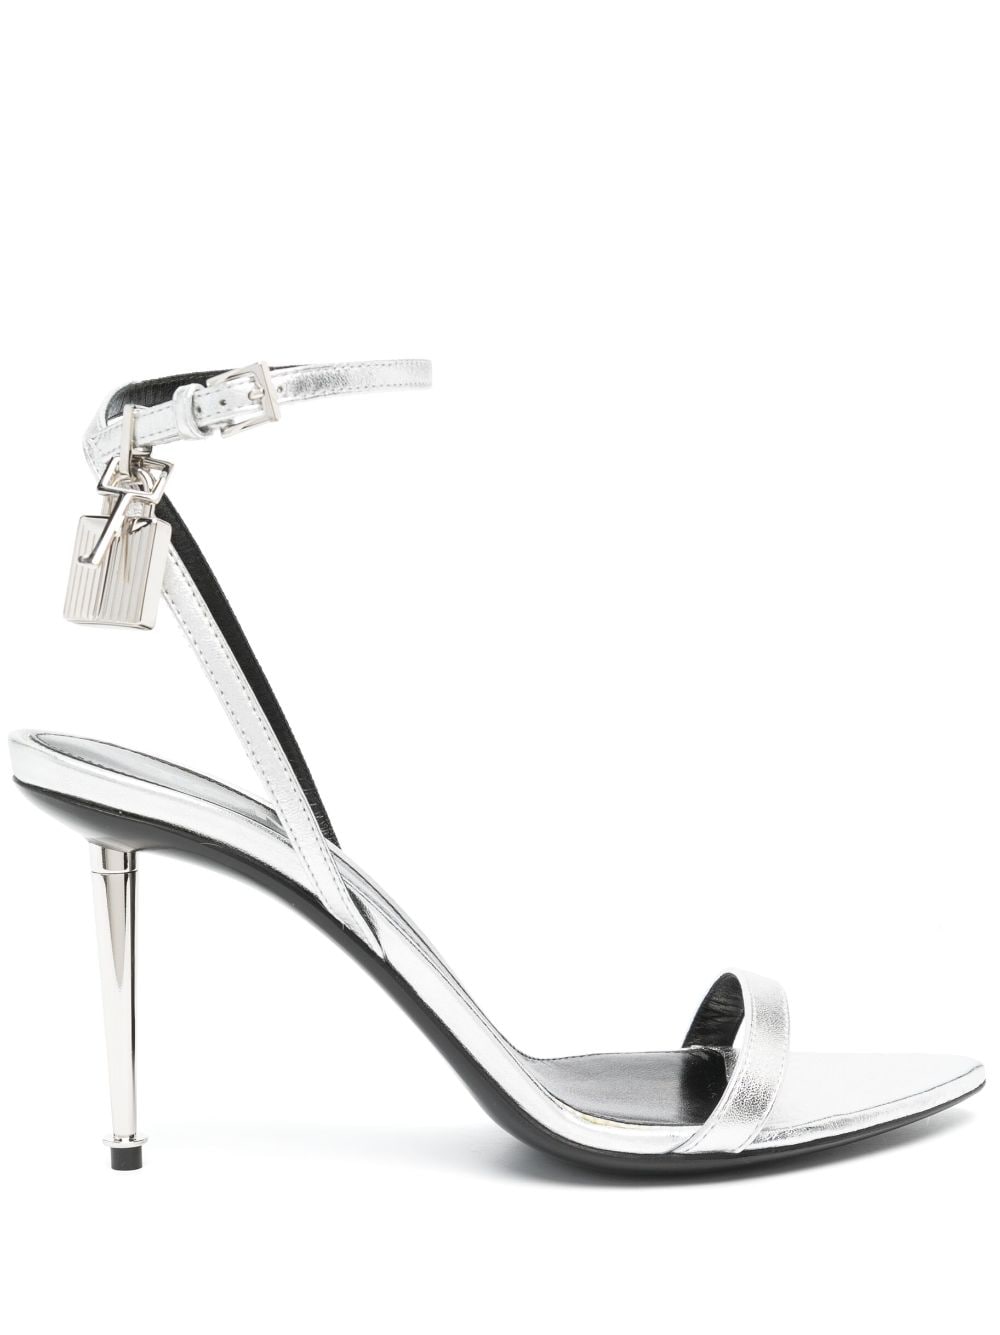 TOM FORD Padlock Pointy Naked 85mm leather sandals - Silver von TOM FORD